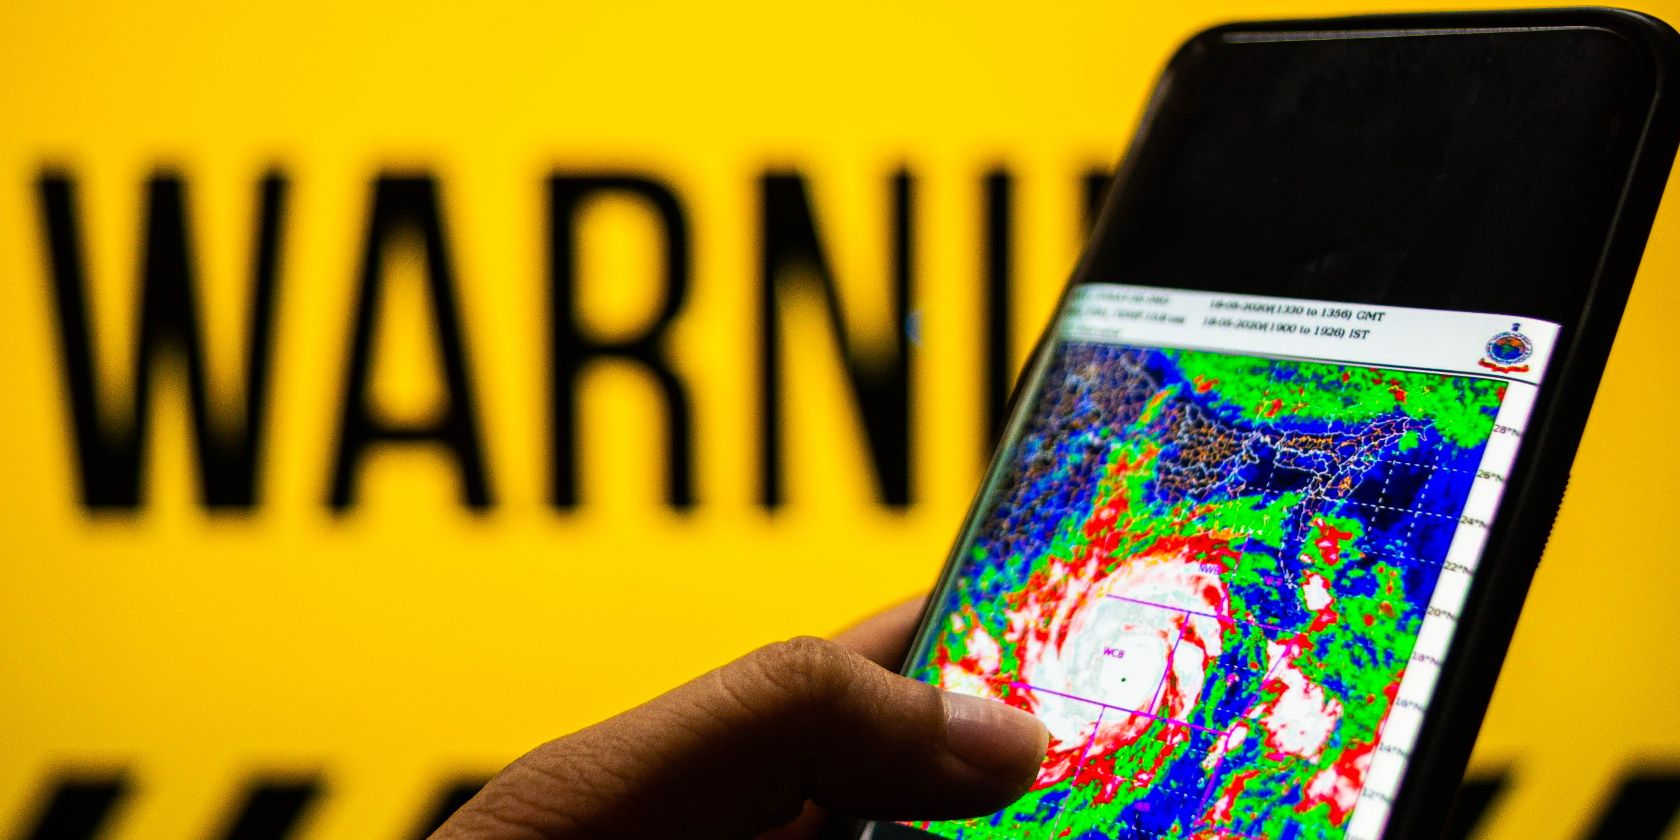 Photograph of a mobile phone with cyclone moving towards the coast shown. The background is yellow with warning sign